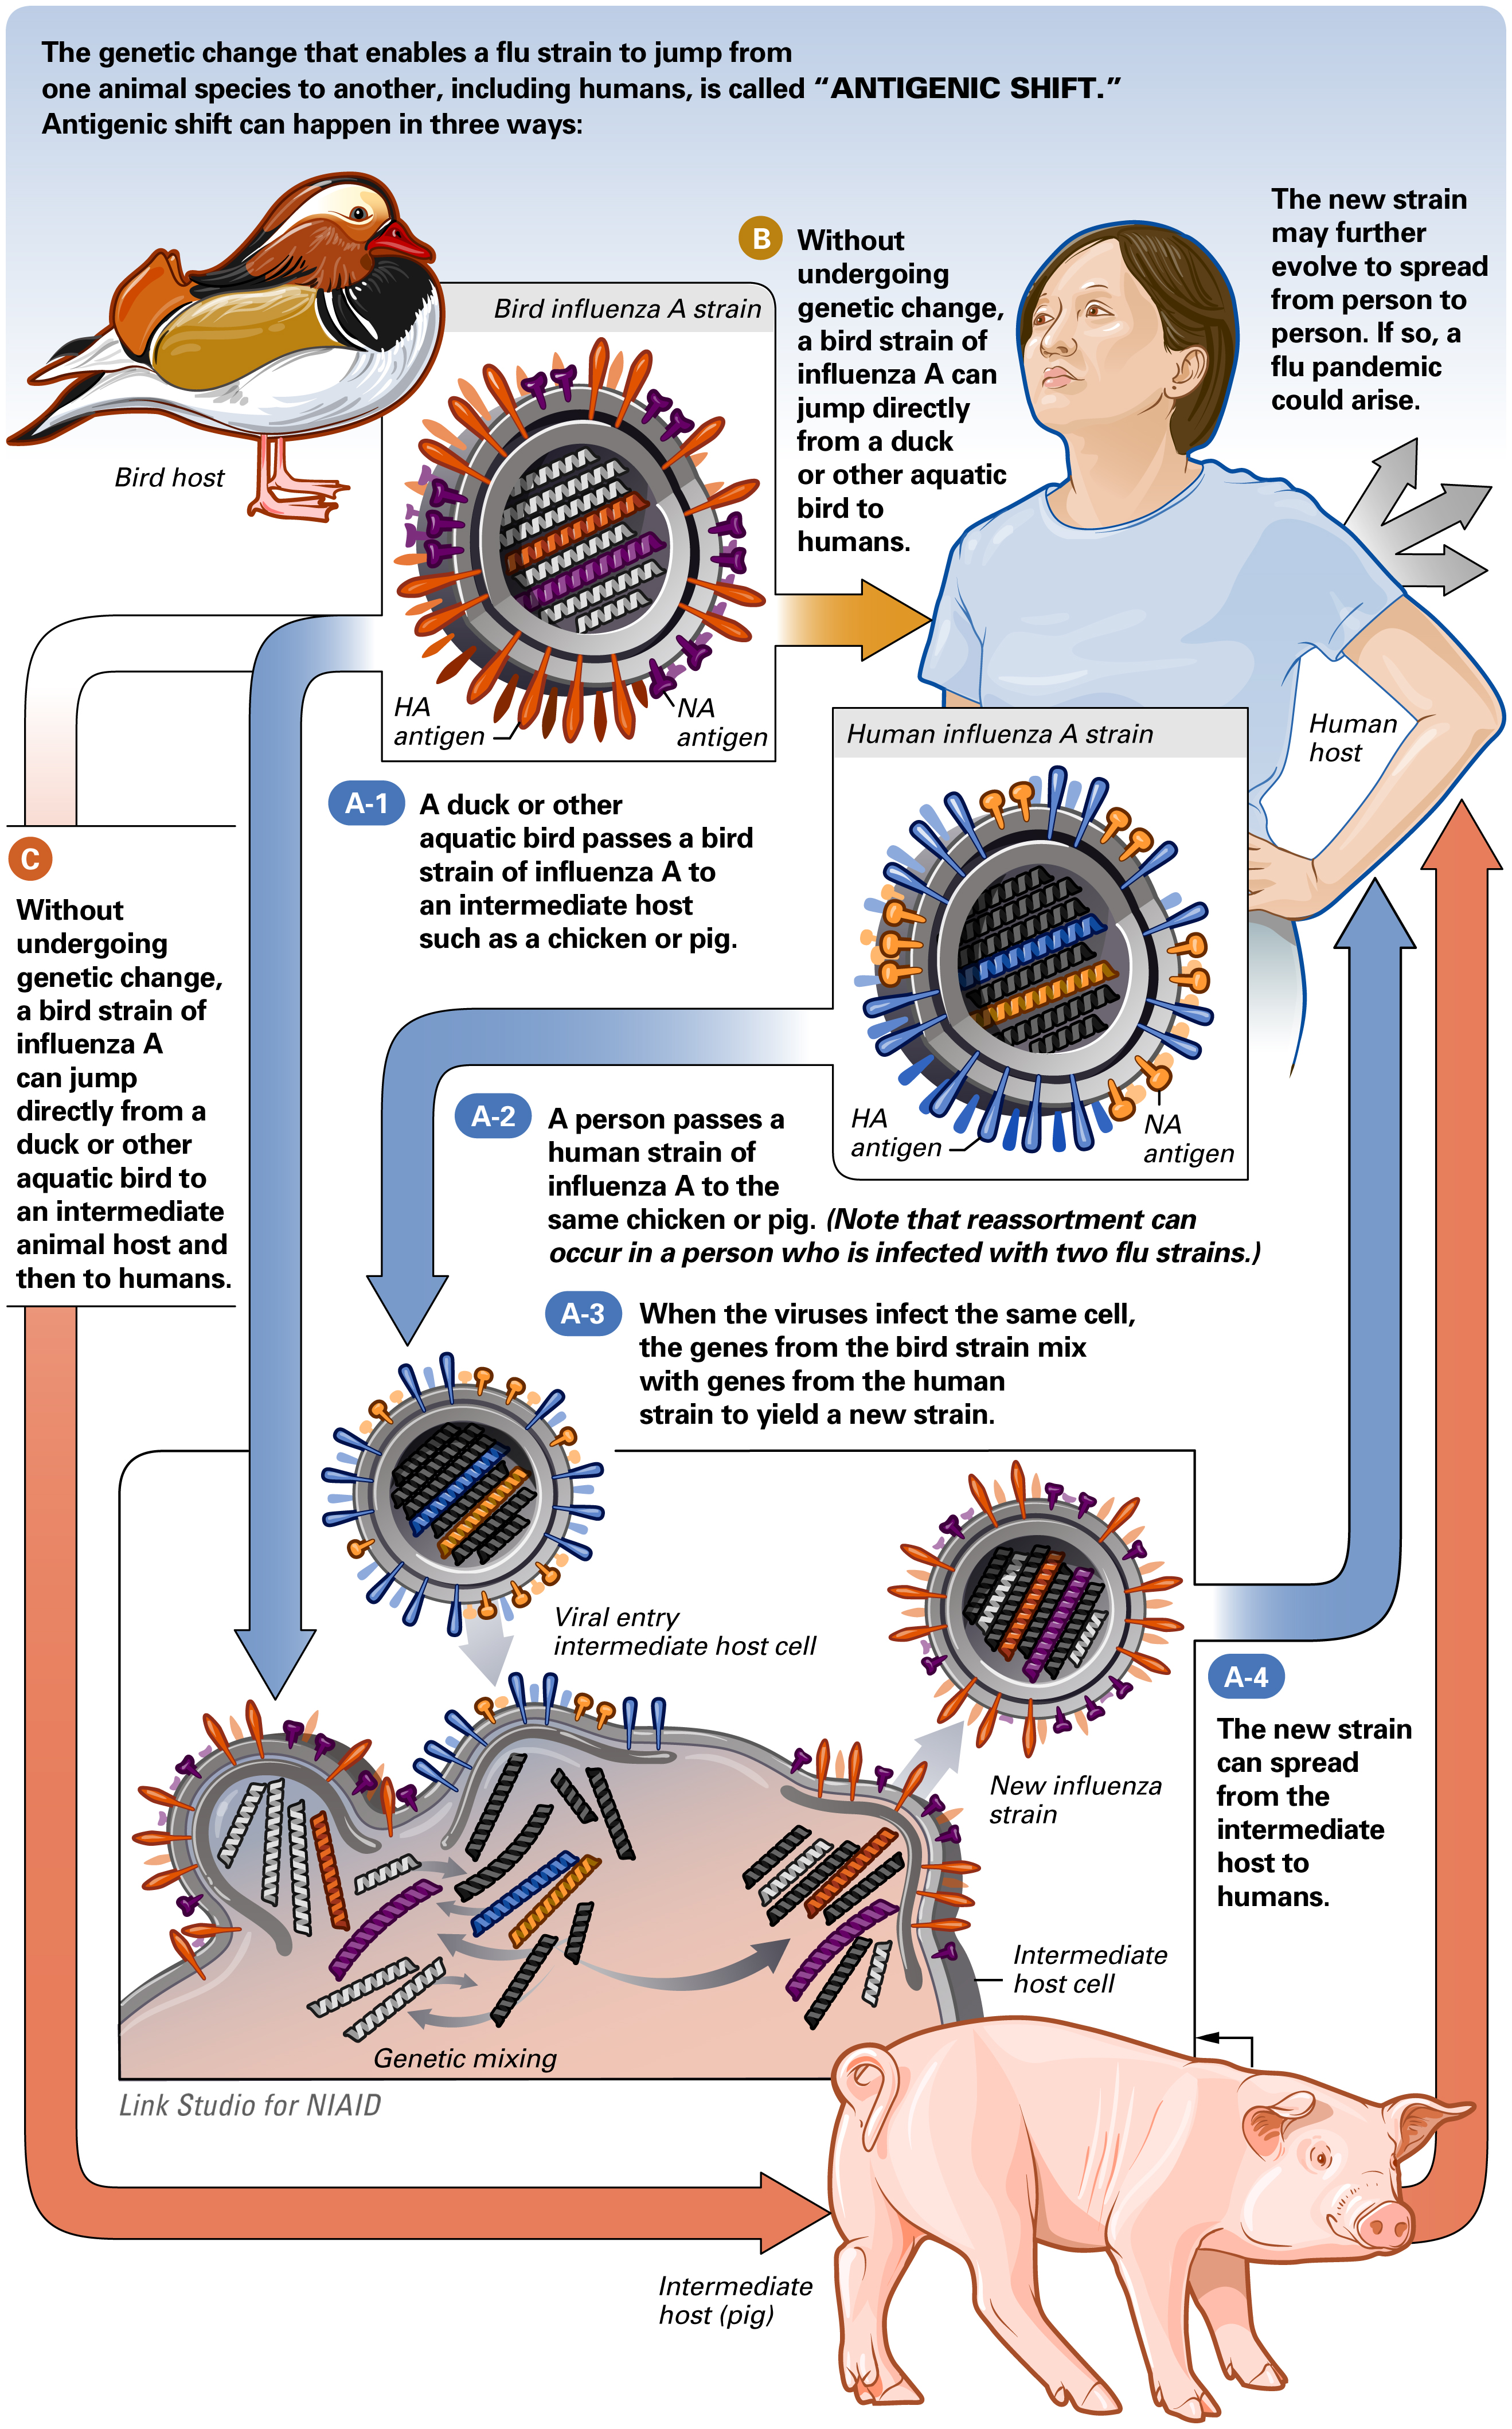 Antigenic Shift Click on the image to expand. Image courtesy of the National Institute of Allergy and Infectious Diseases (NIAID) [2]